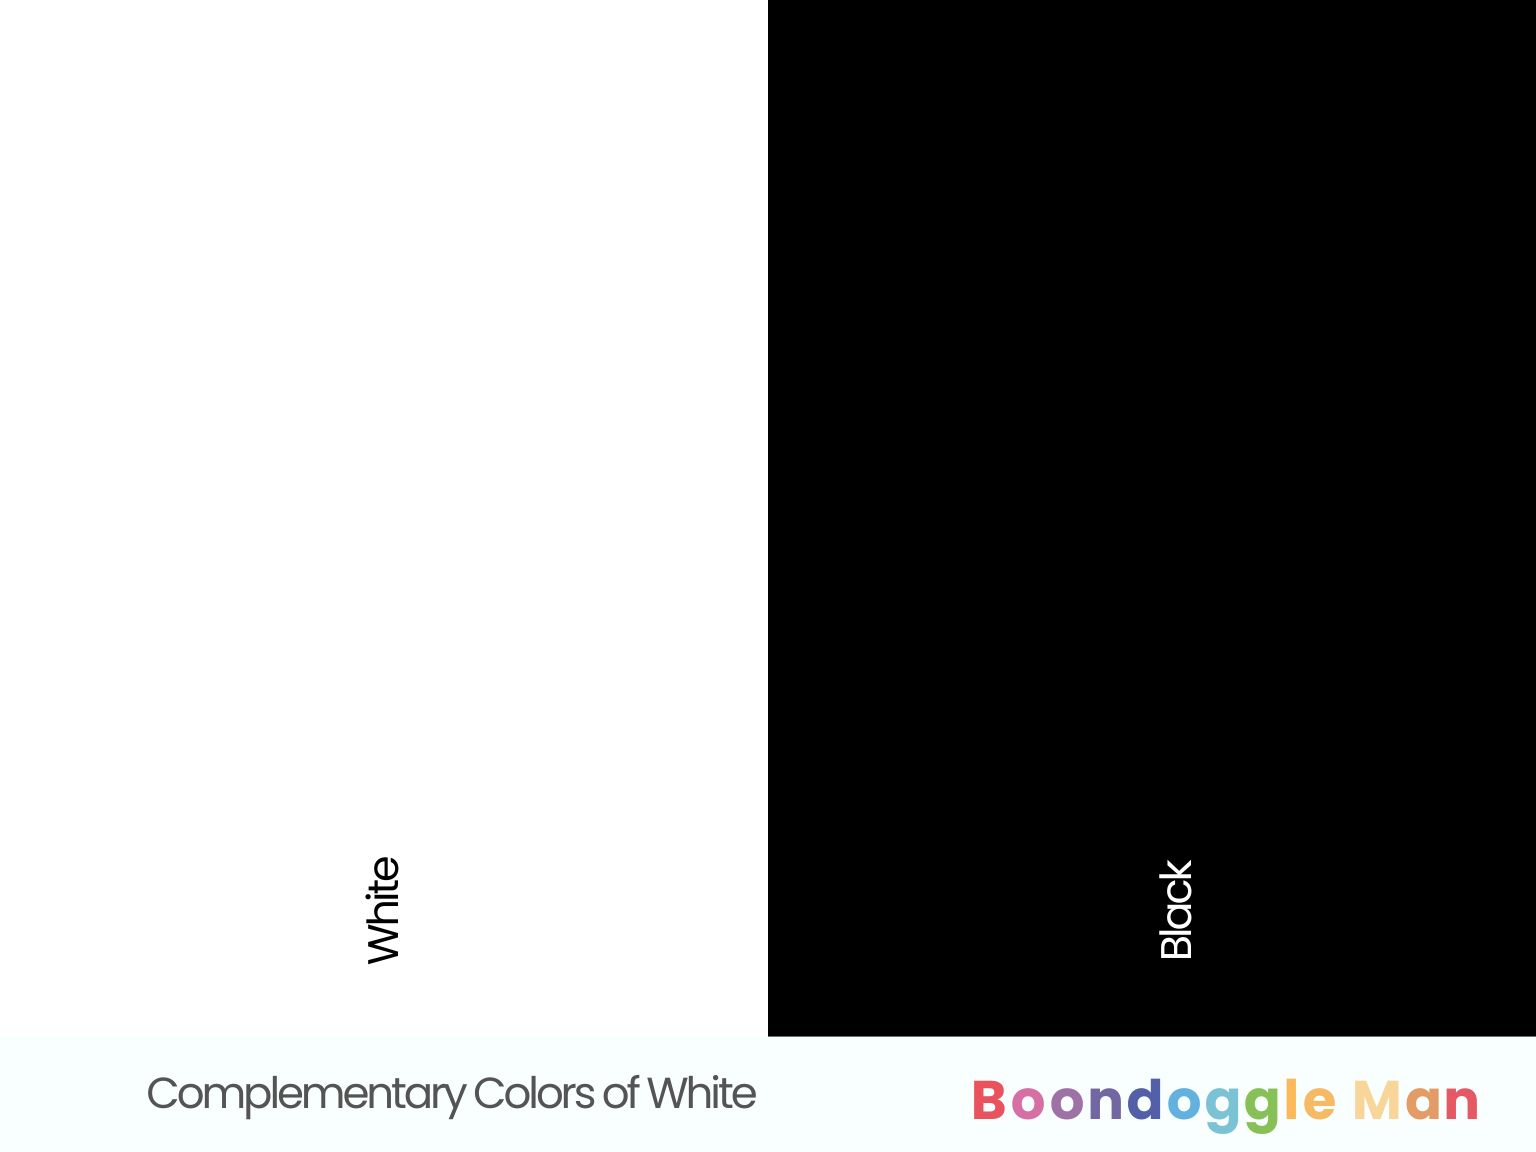 Complementary Colors of White